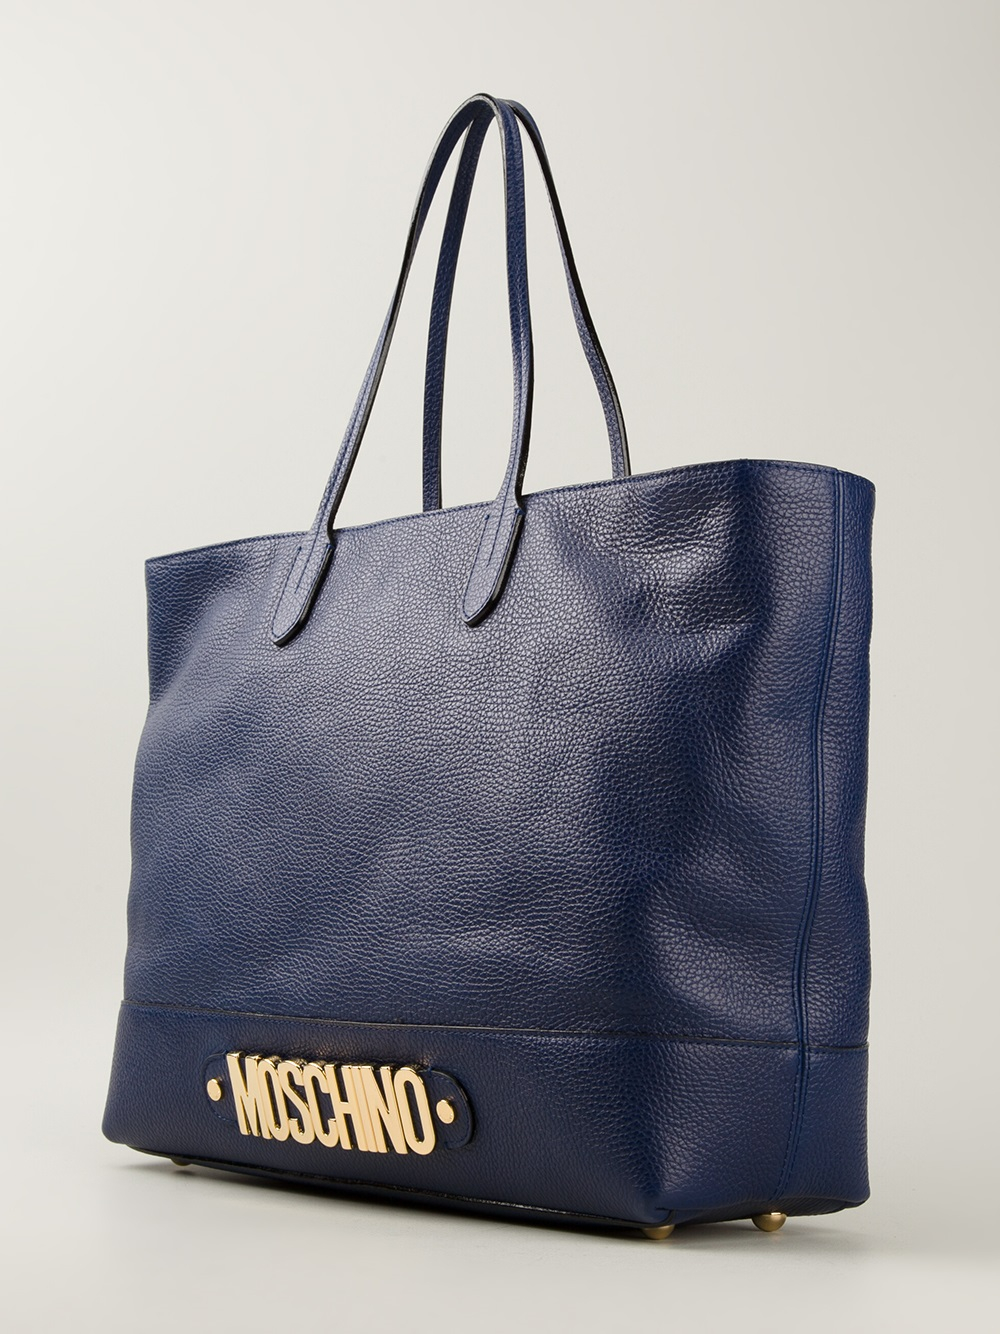 Moschino Large Tote Bag in Blue | Lyst